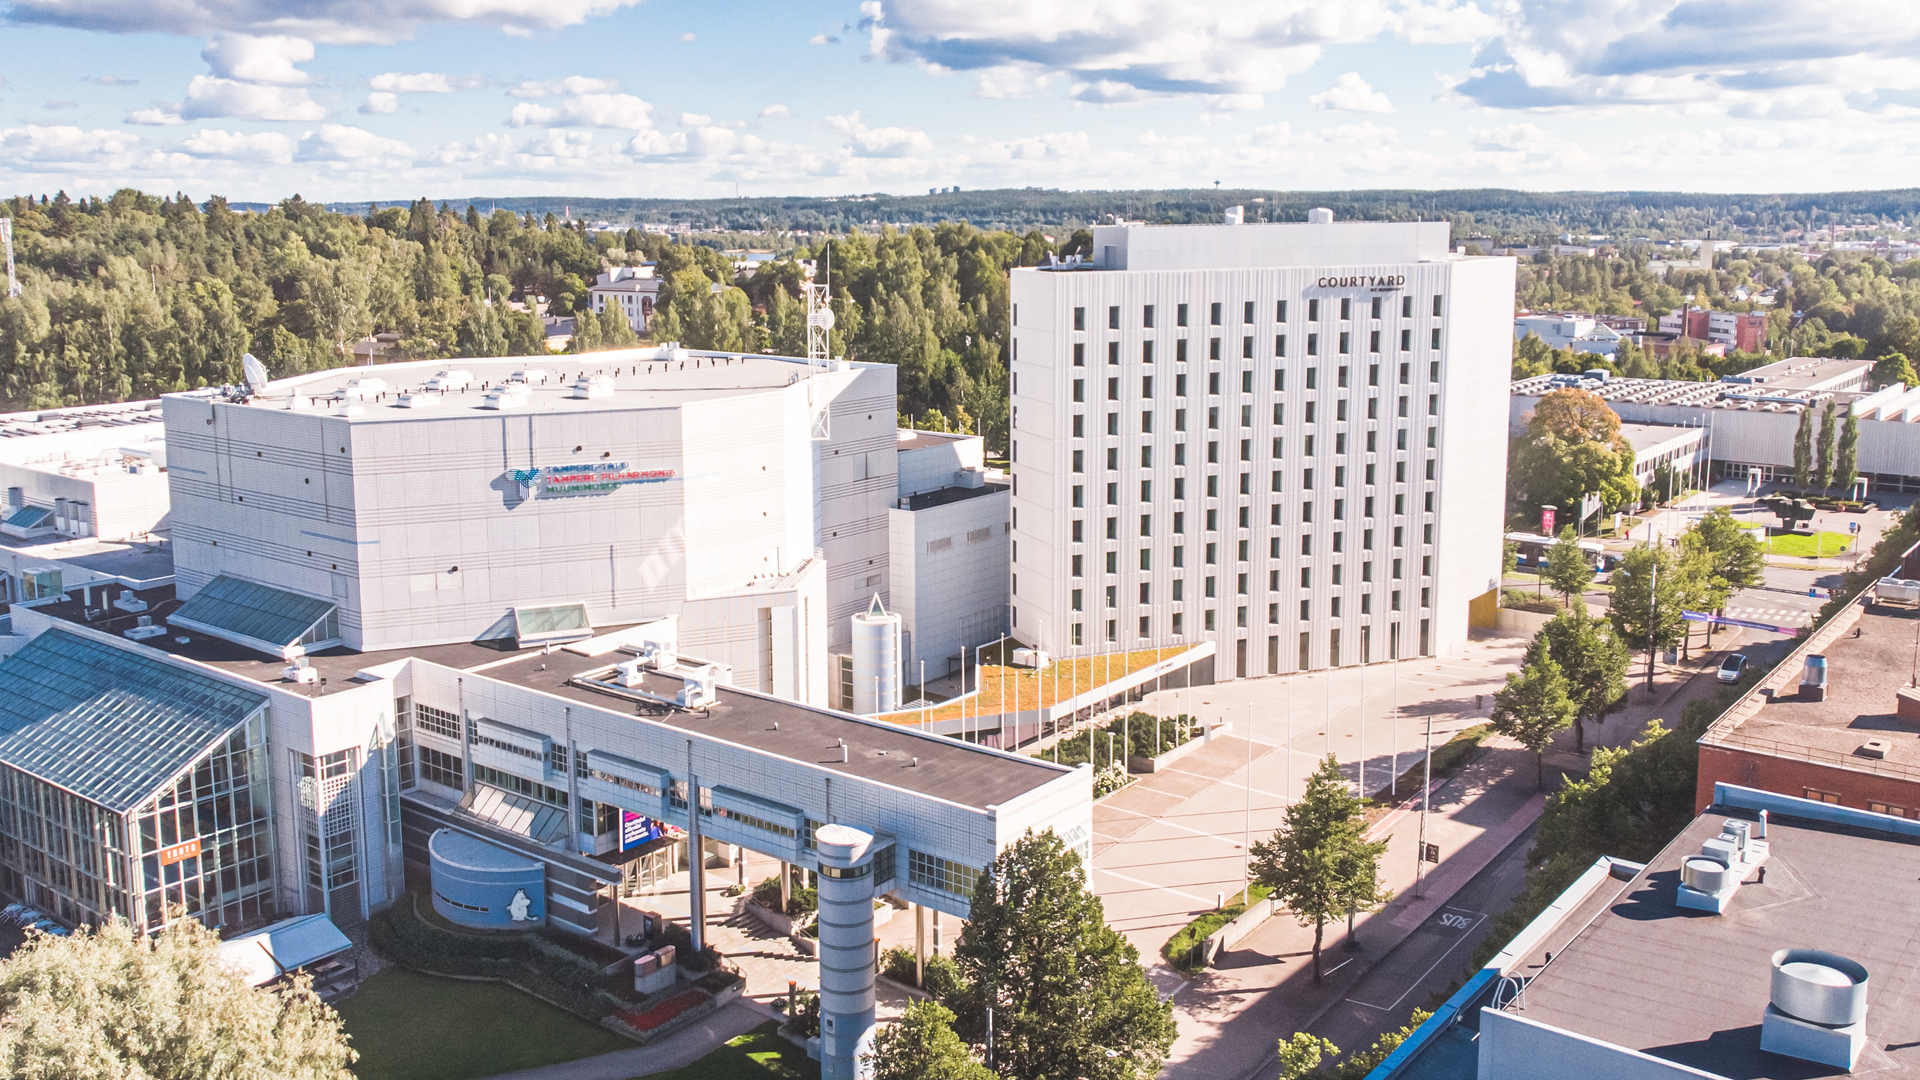 Courtyard by Marriott Tampere City, Visit Tampere Laura Vanzo